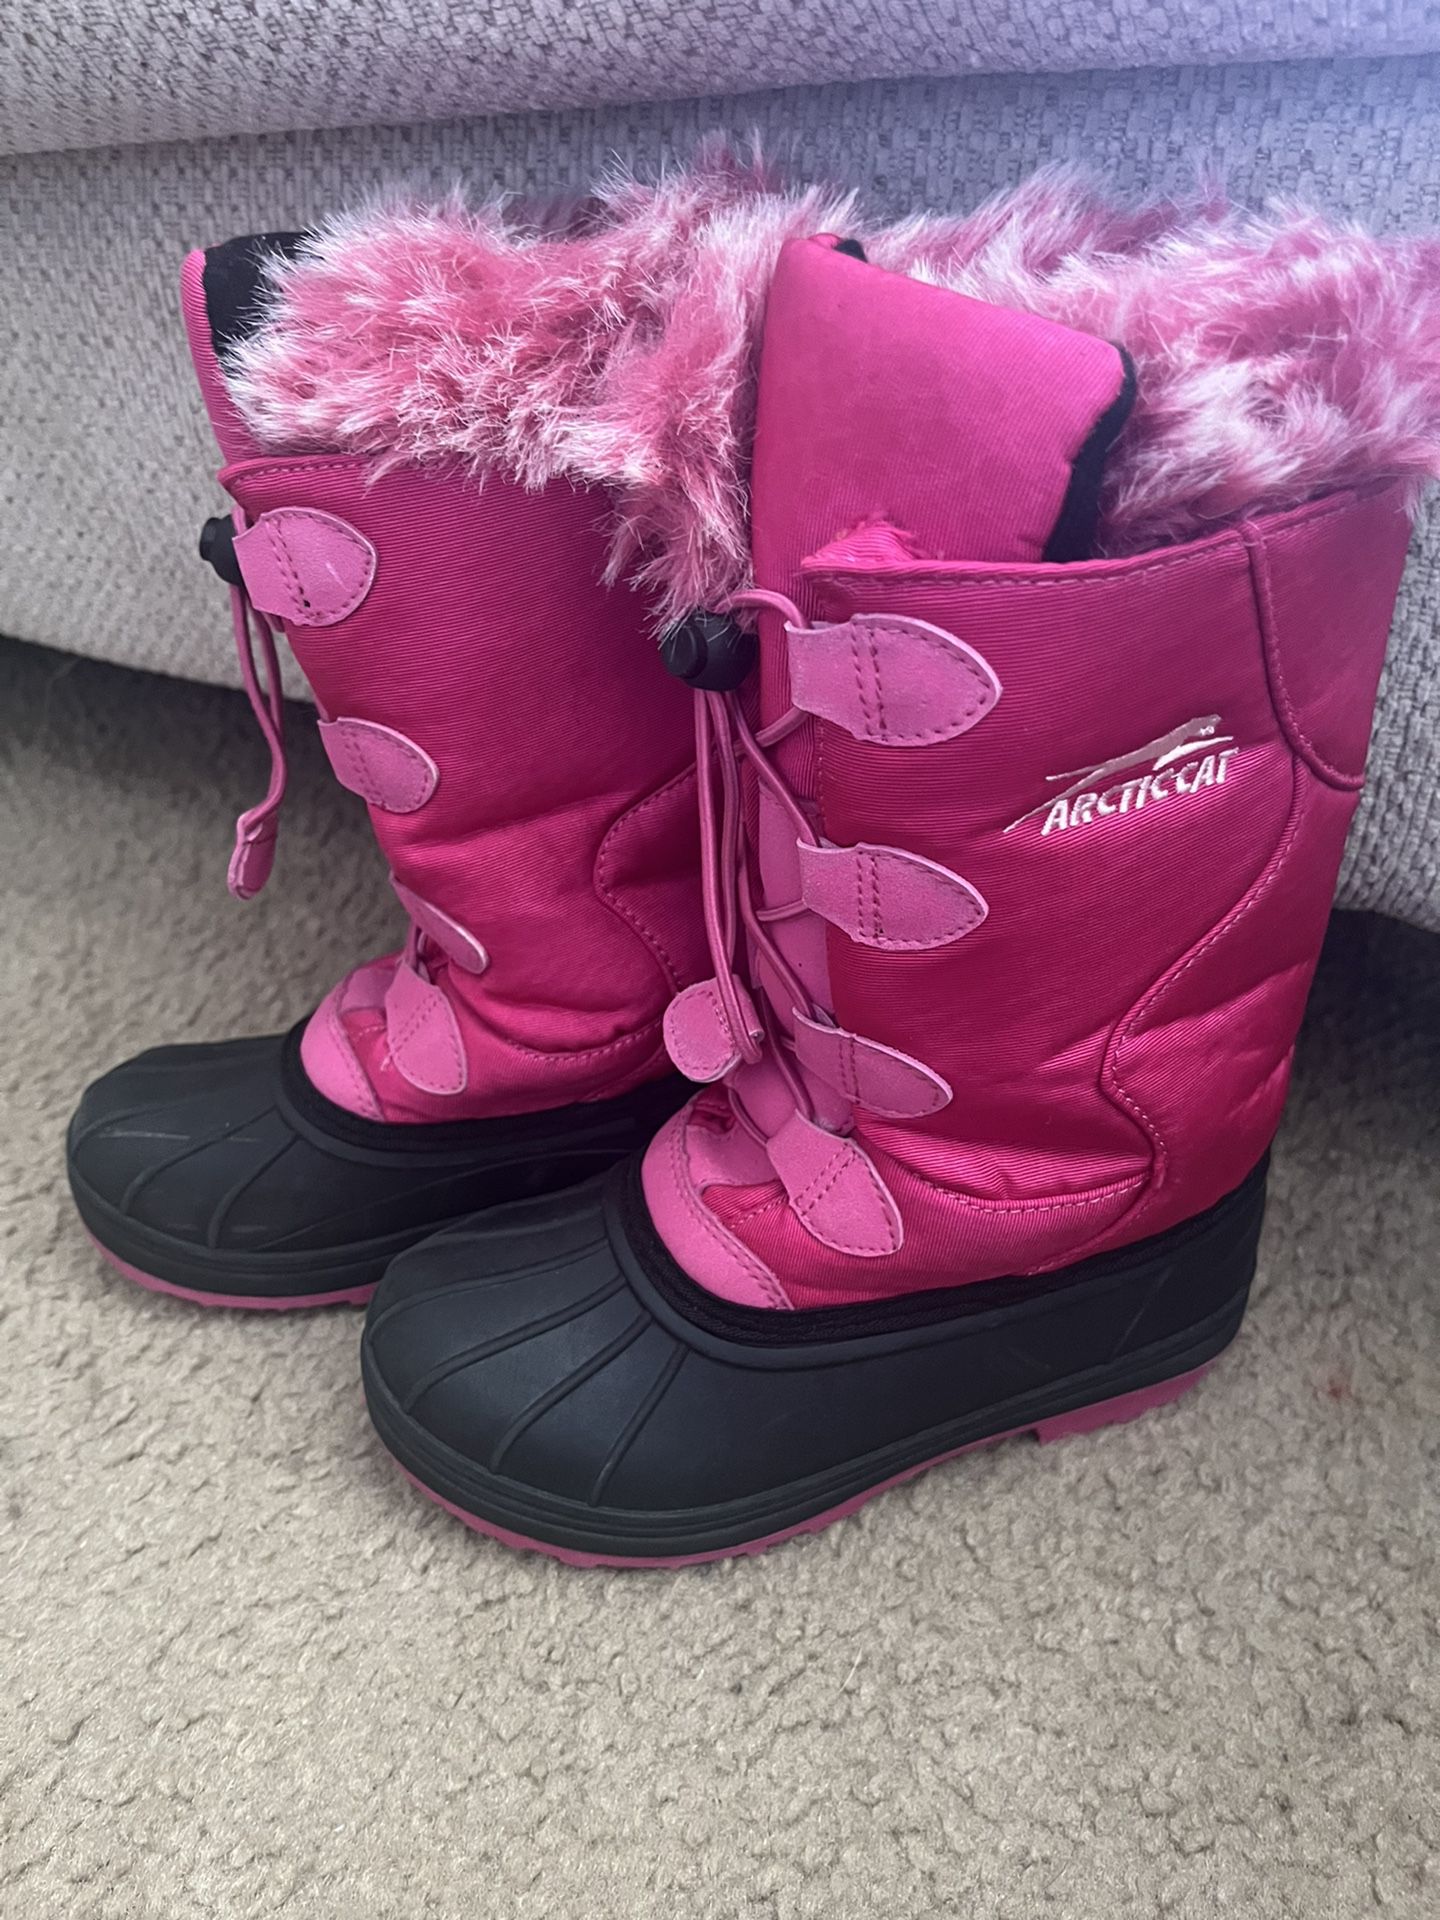 Arctic Cat Snowcharm Snow Boots Pink Girls Size 1 Faux Fur Lined Thinsulate